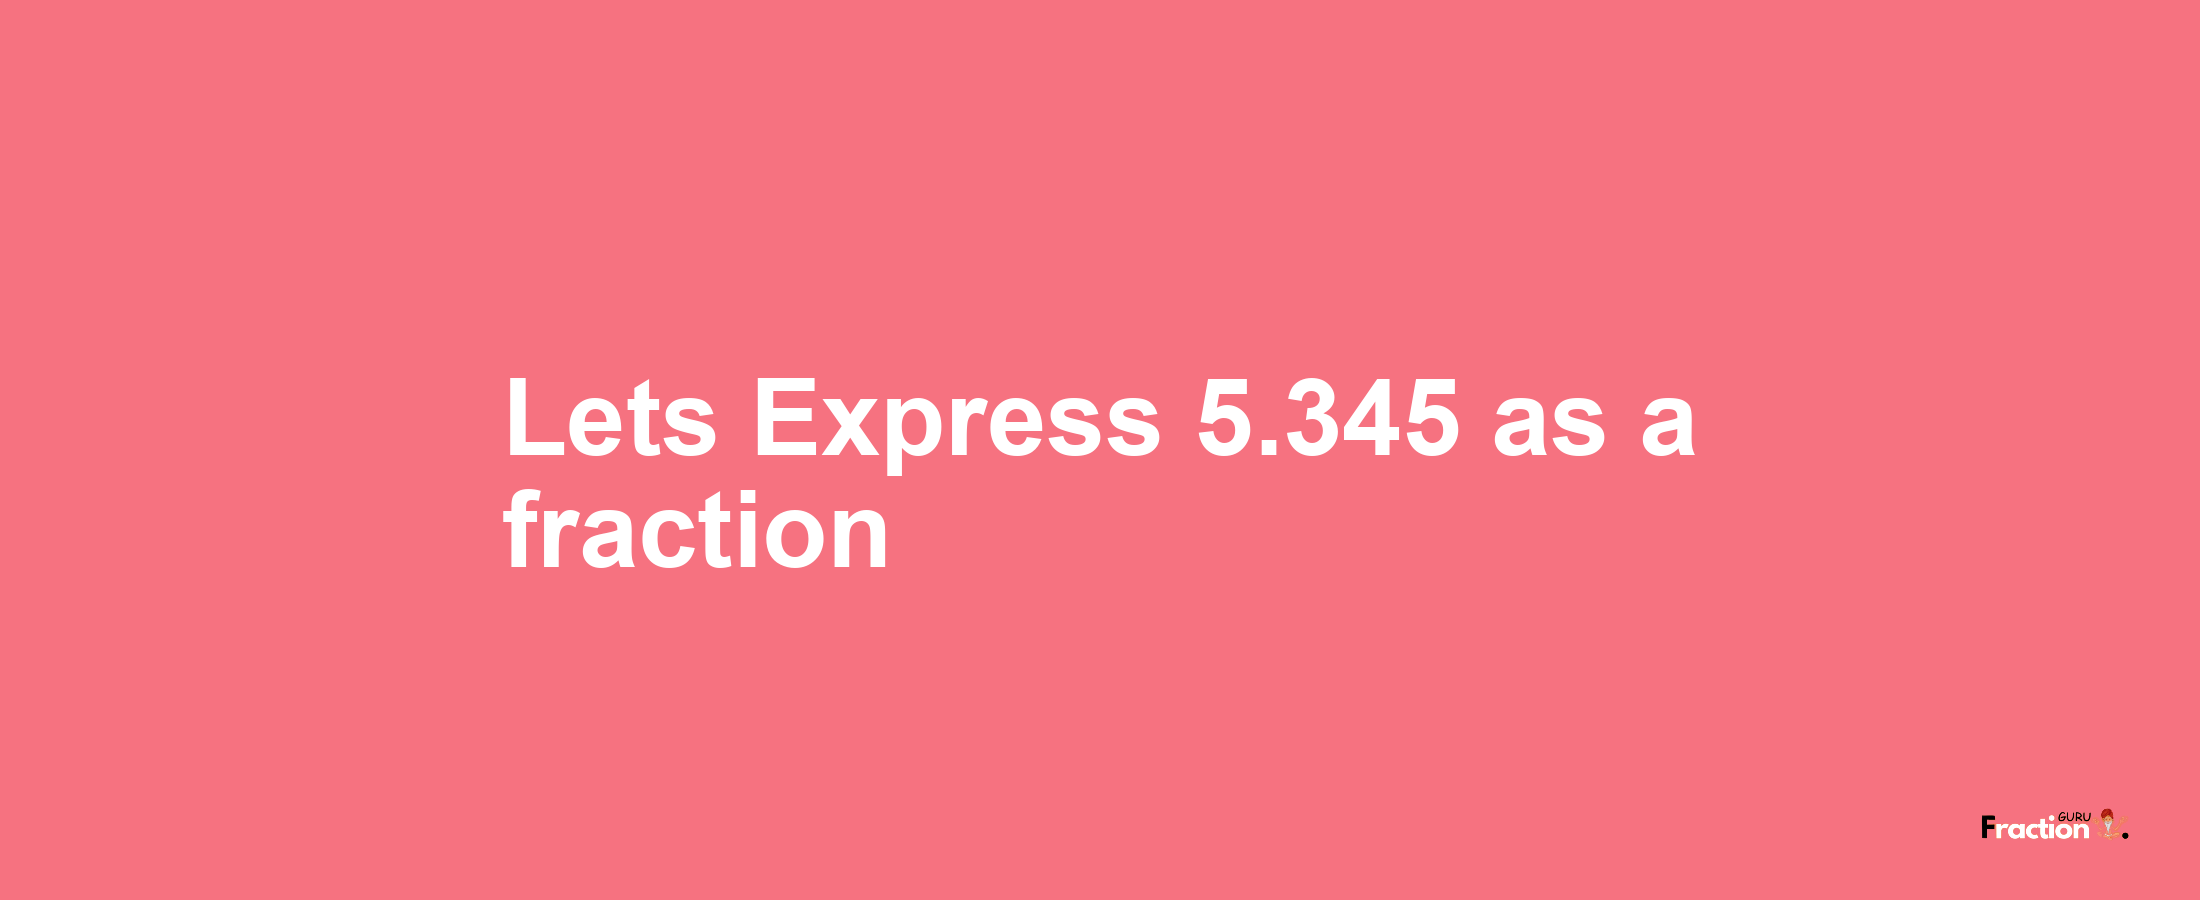 Lets Express 5.345 as afraction